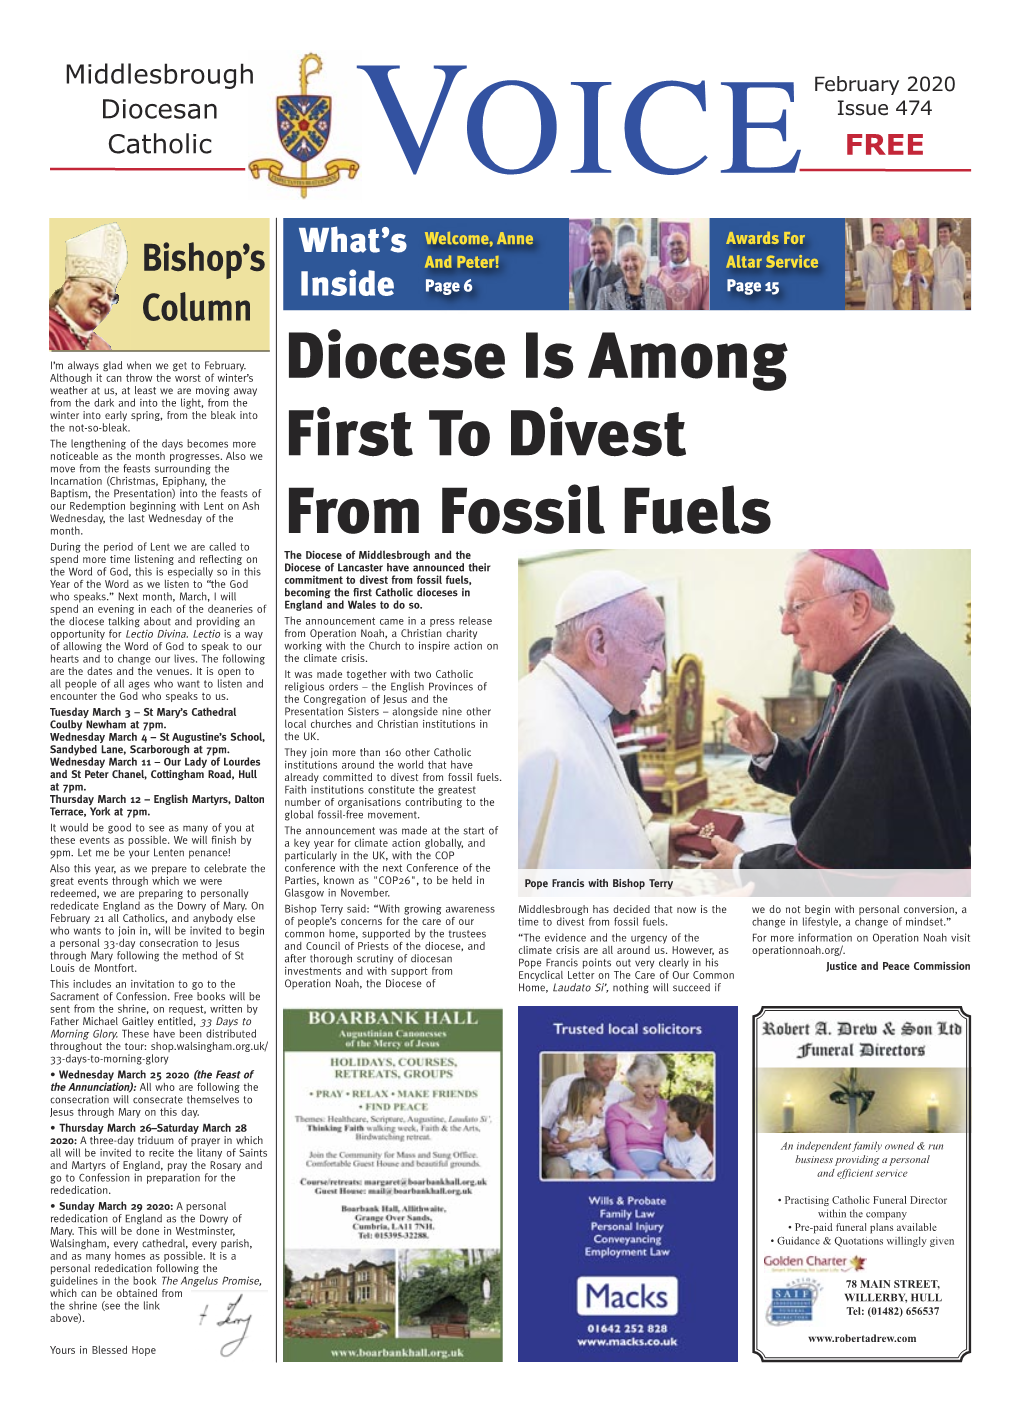 Diocese Is Among First to Divest from Fossil Fuels